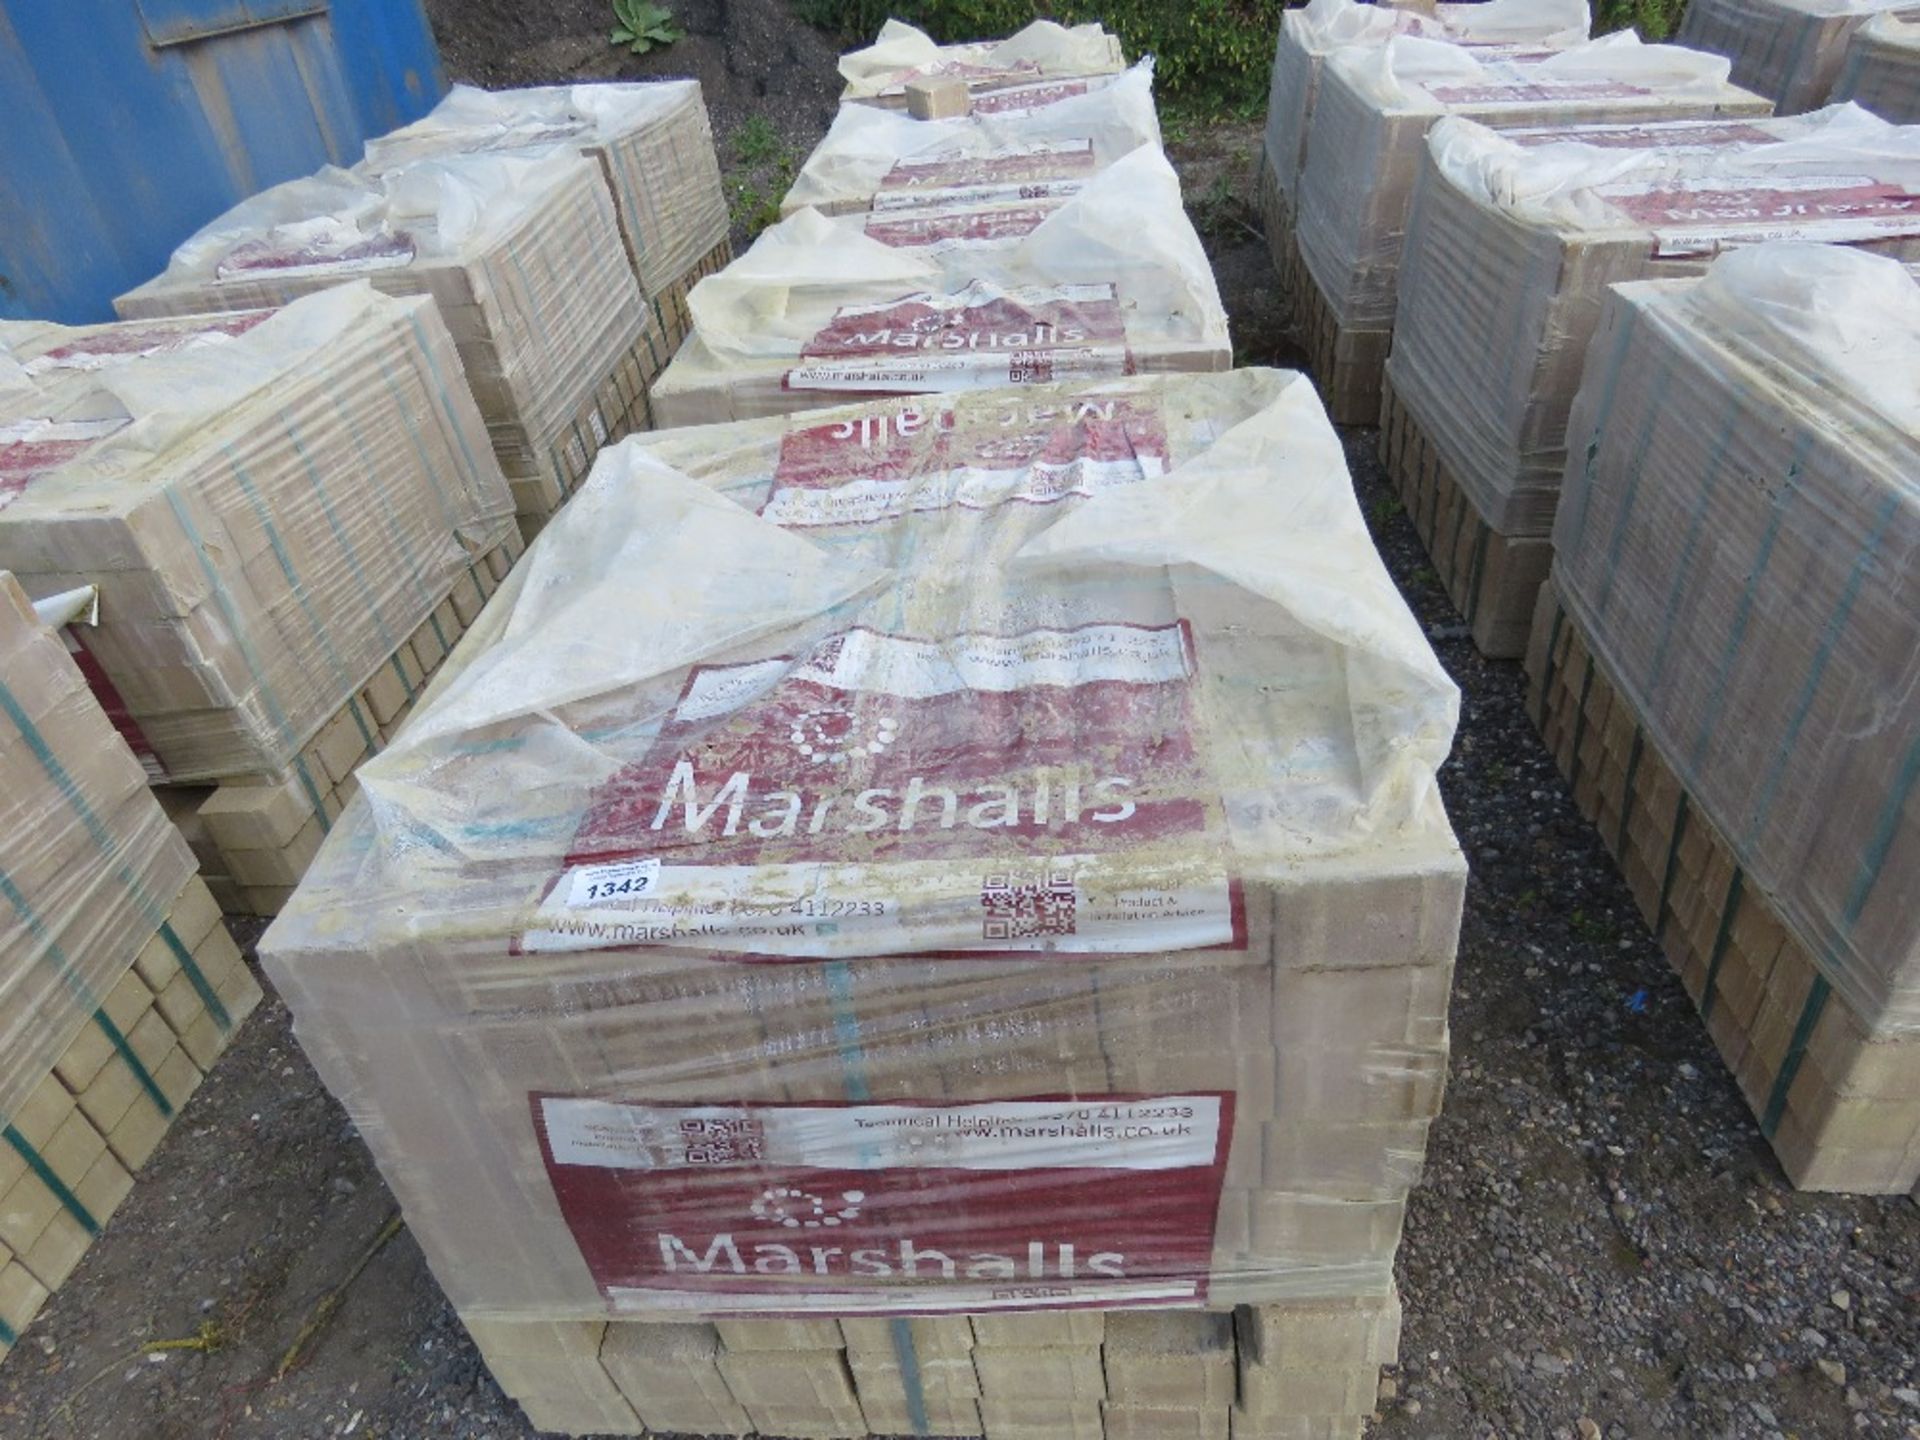 4 X PACKS OF MARSHALL HARVEST BUFF PAVERS, UNUSED. THIS LOT IS SOLD UNDER THE AUCTIONEERS MARGIN